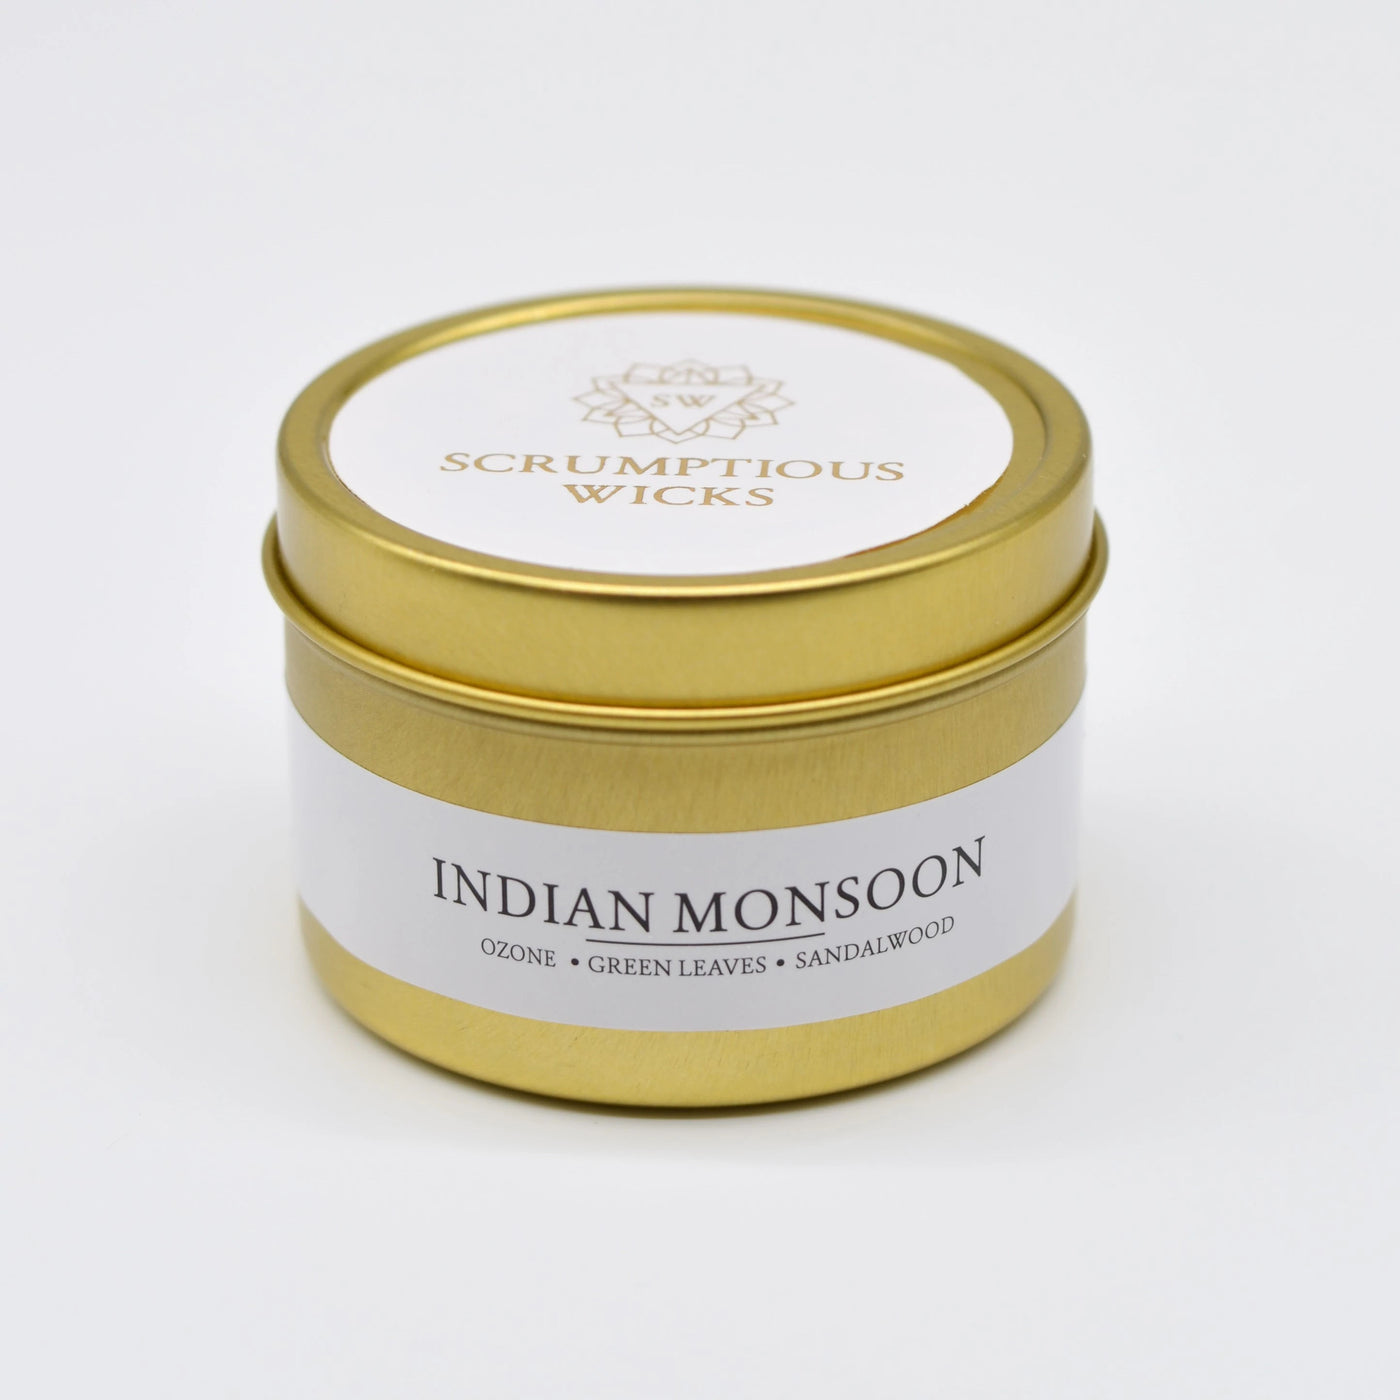 Indian Monsoon Tin candle by Scrumptious Wicks